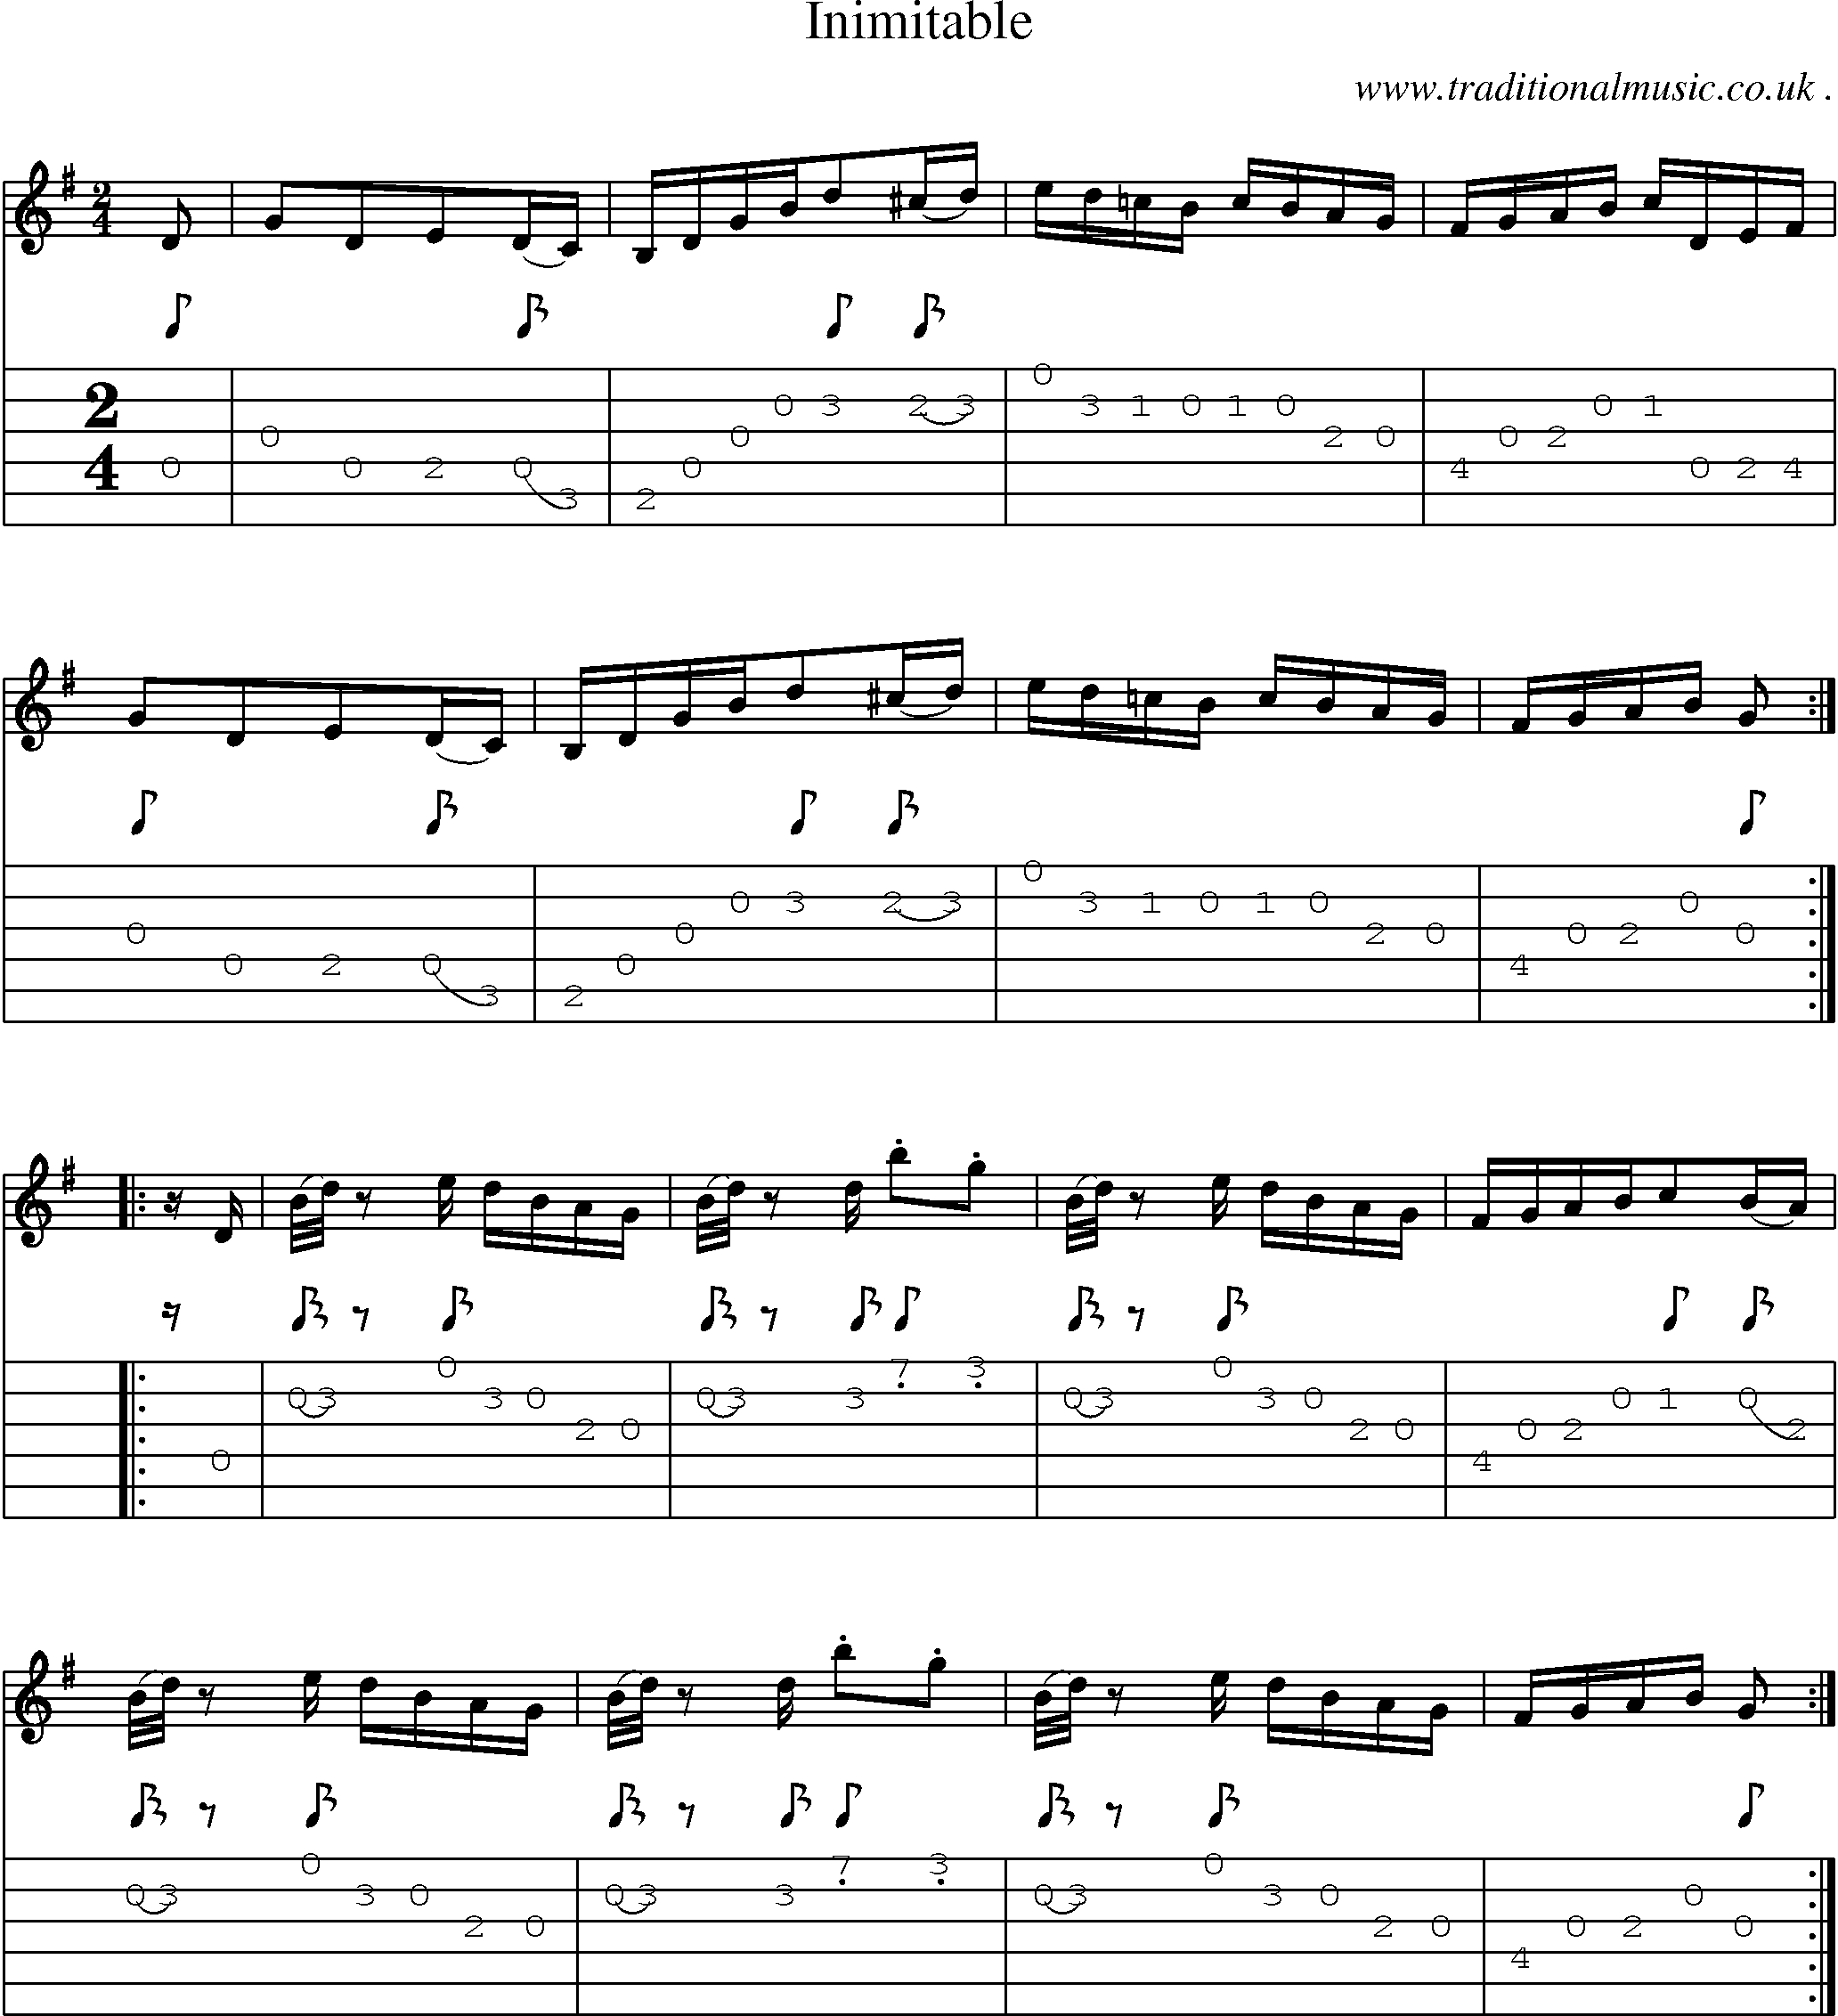 Sheet-Music and Guitar Tabs for Inimitable